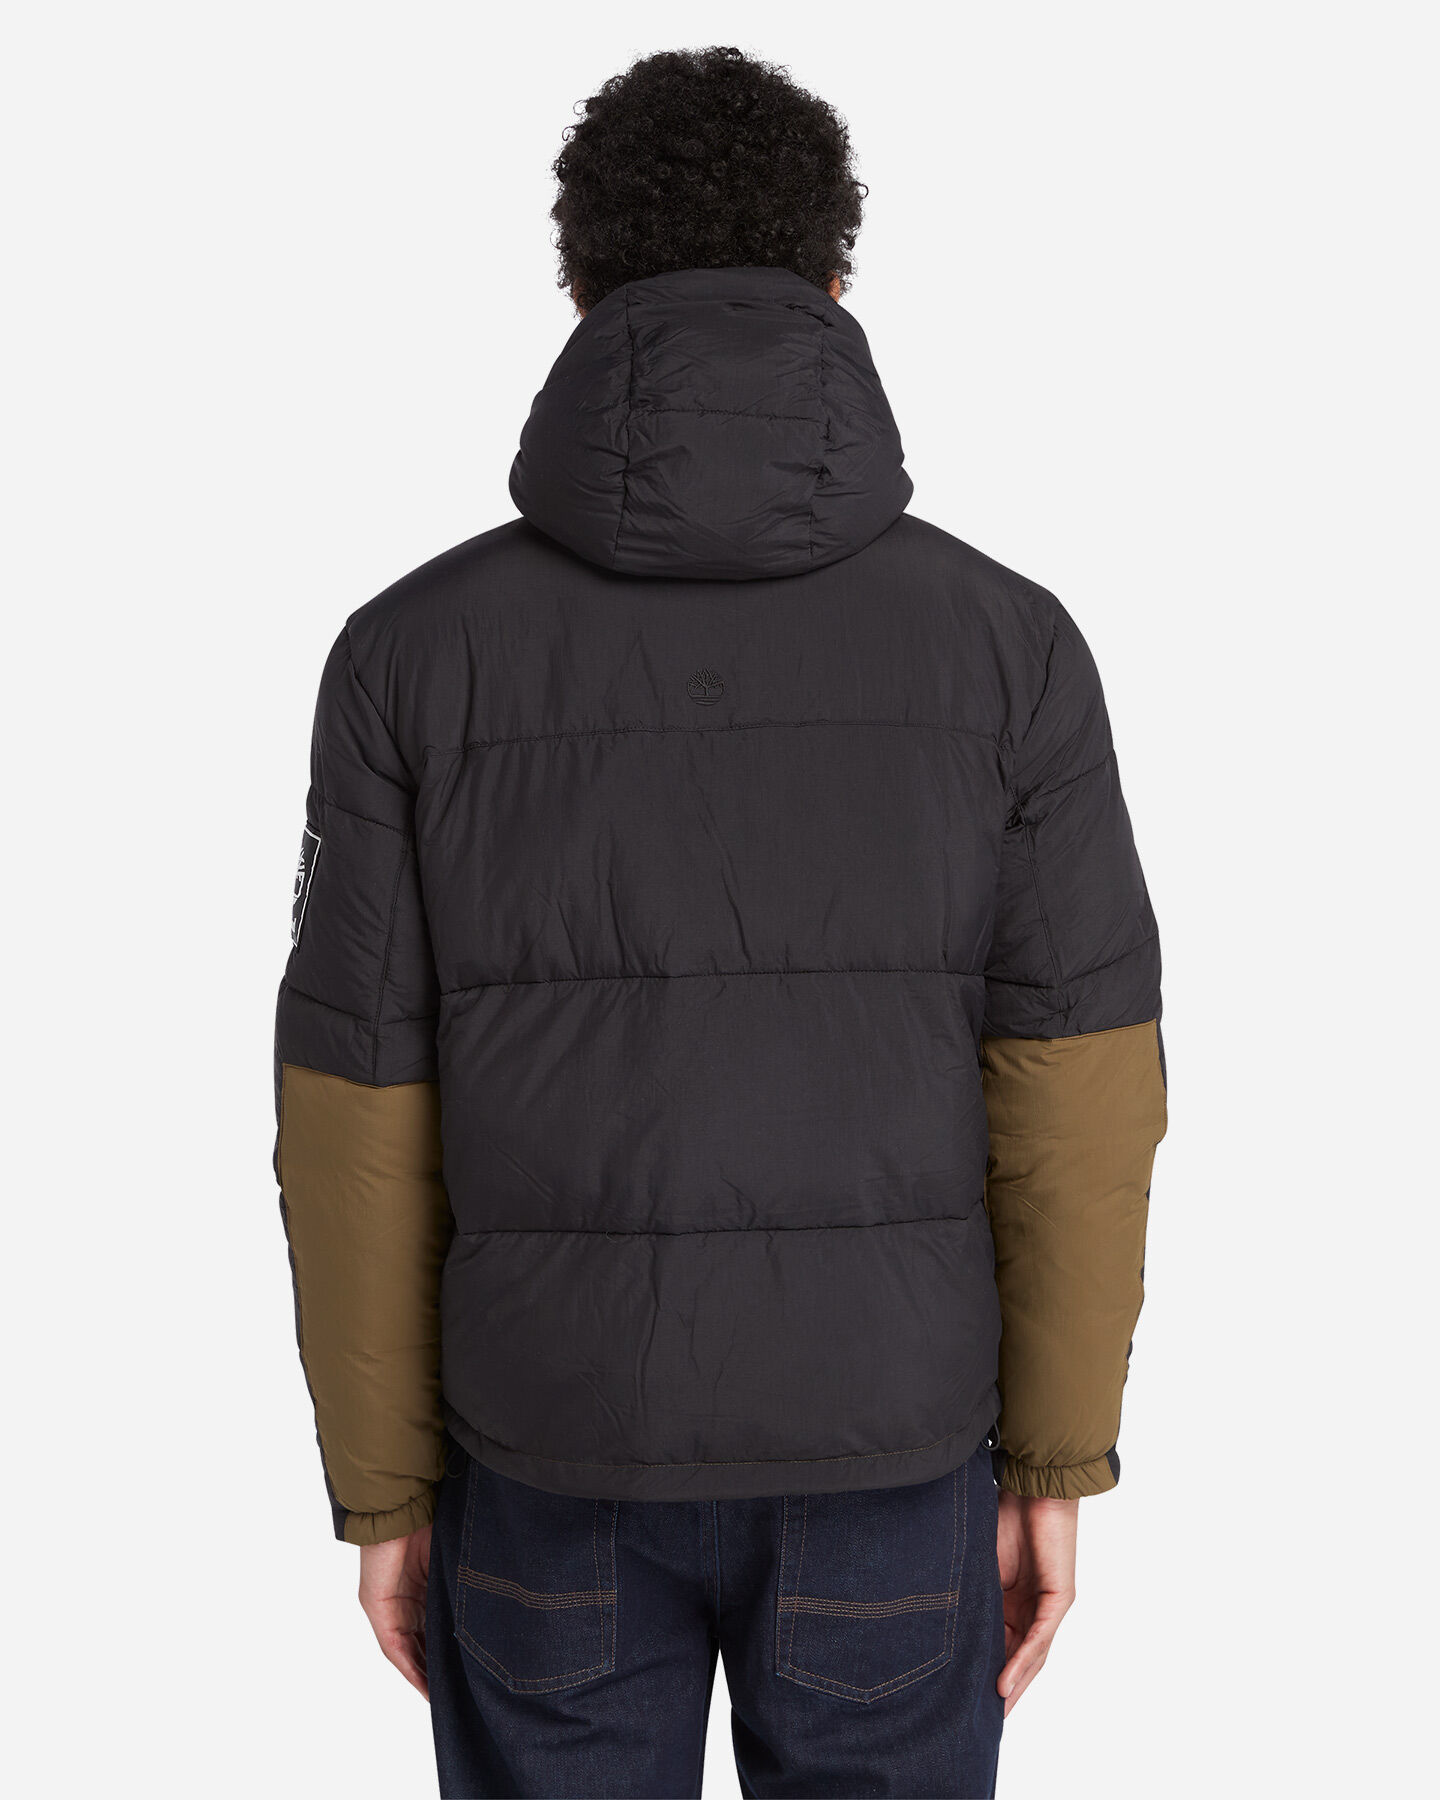  Giubbotto TIMBERLAND PUFFER M S4127282|DX81|XL scatto 2